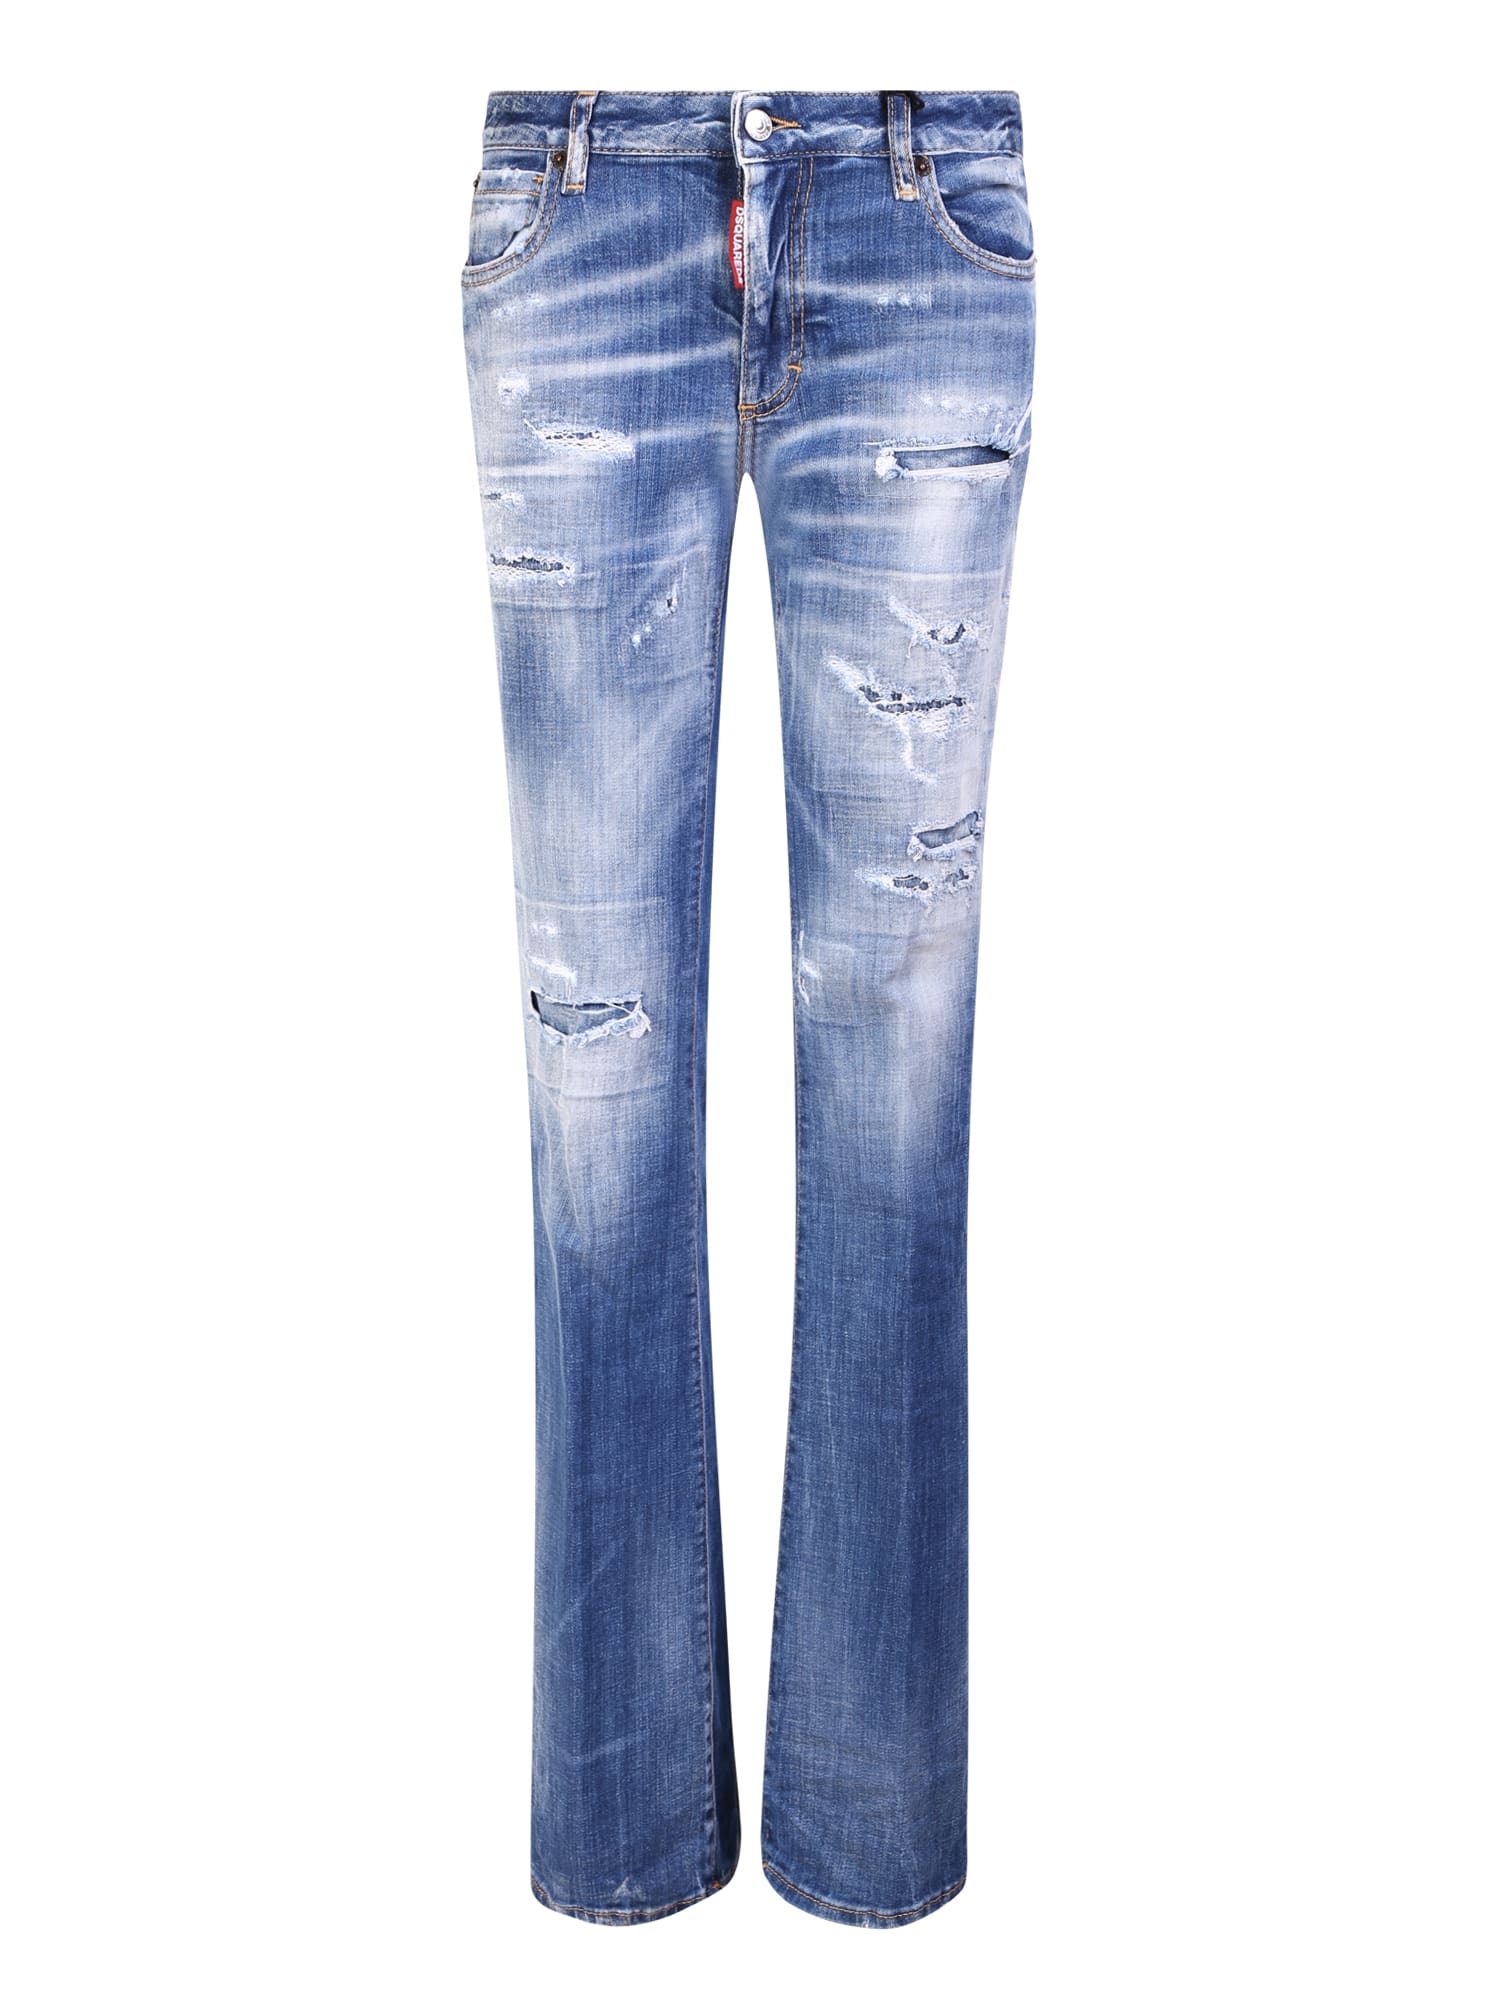 DSQUARED2 FLARED JEANS WITH TEAR DETAIL BY . INNOVATIVE MODEL THAT DIFFERS FROM THE ICONIC JEANS, IDEAL FOR MA